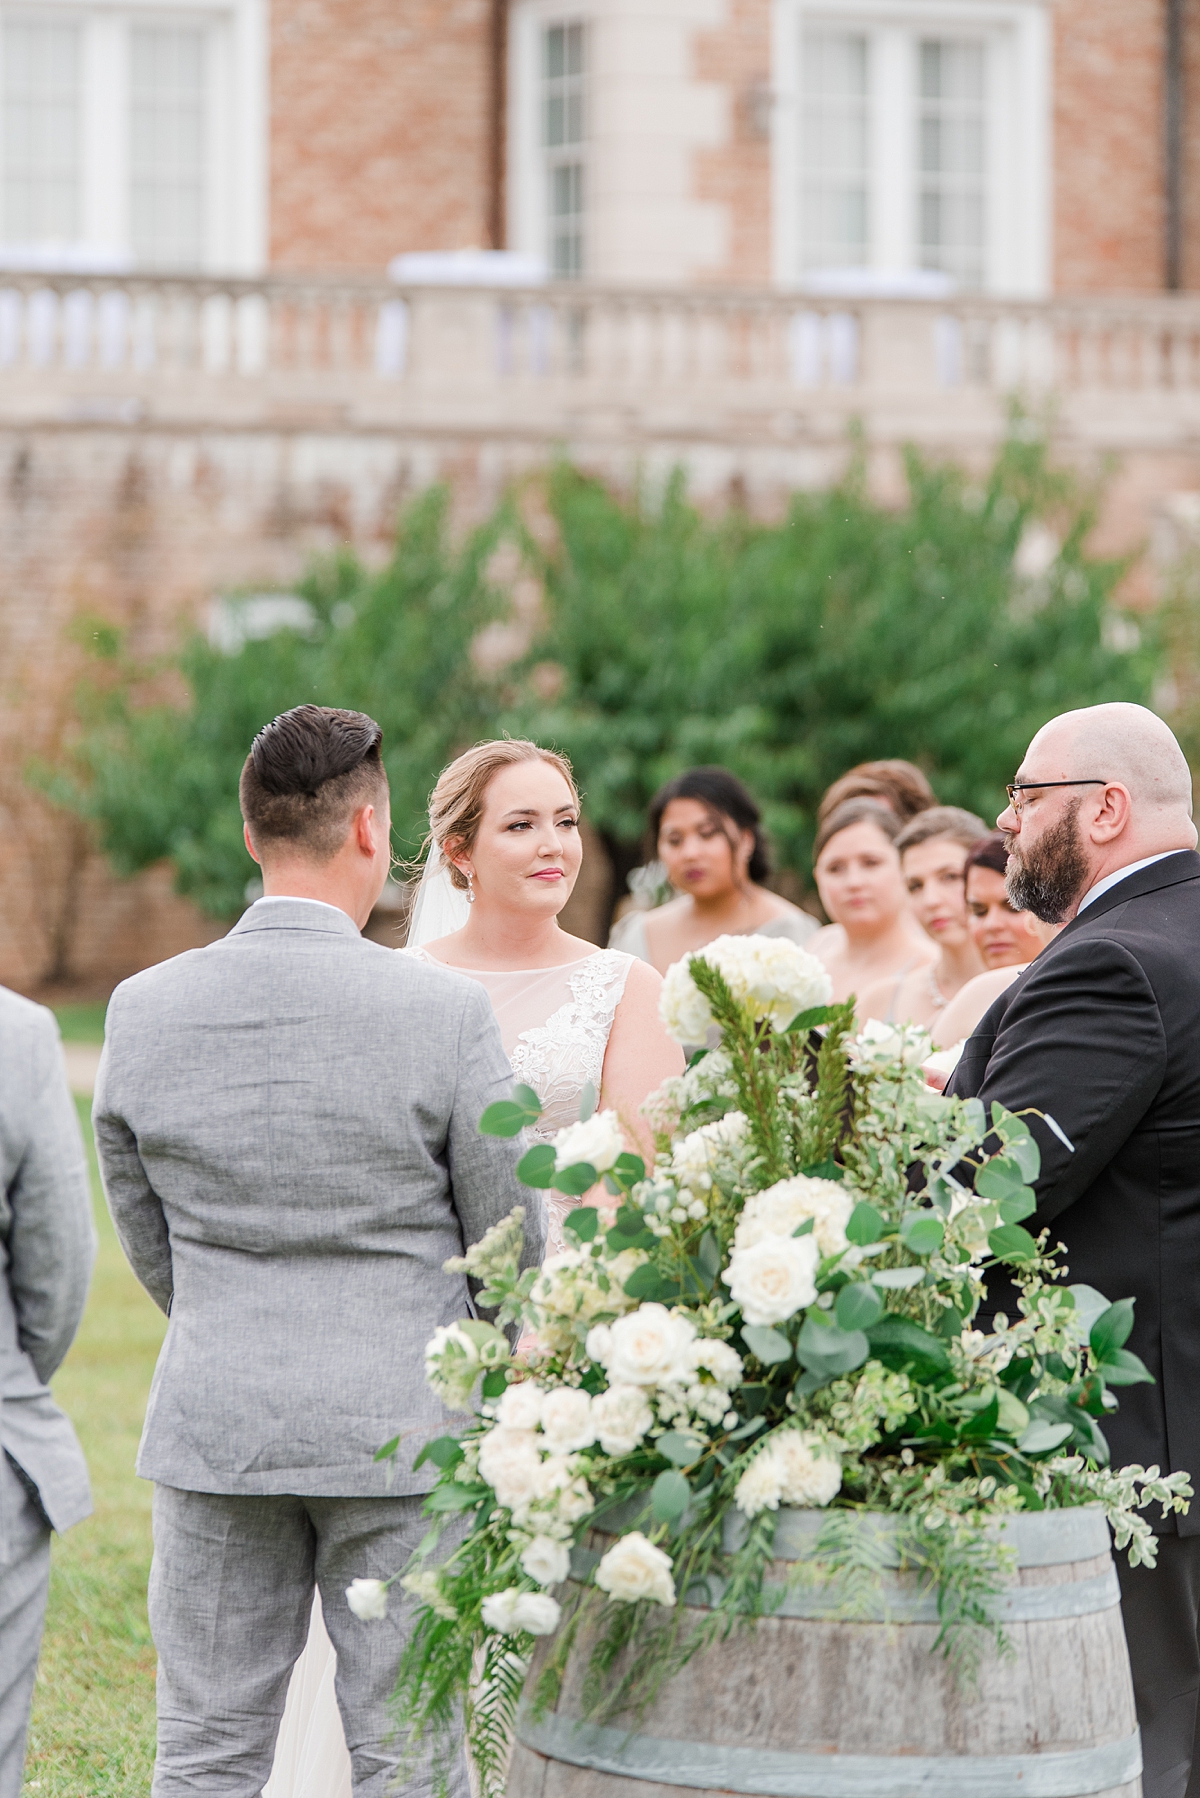 Ceremony at a Timeless Grace Estate Winery Wedding. Wedding Photography by Richmond Wedding Photographer Kailey Brianne Photography.